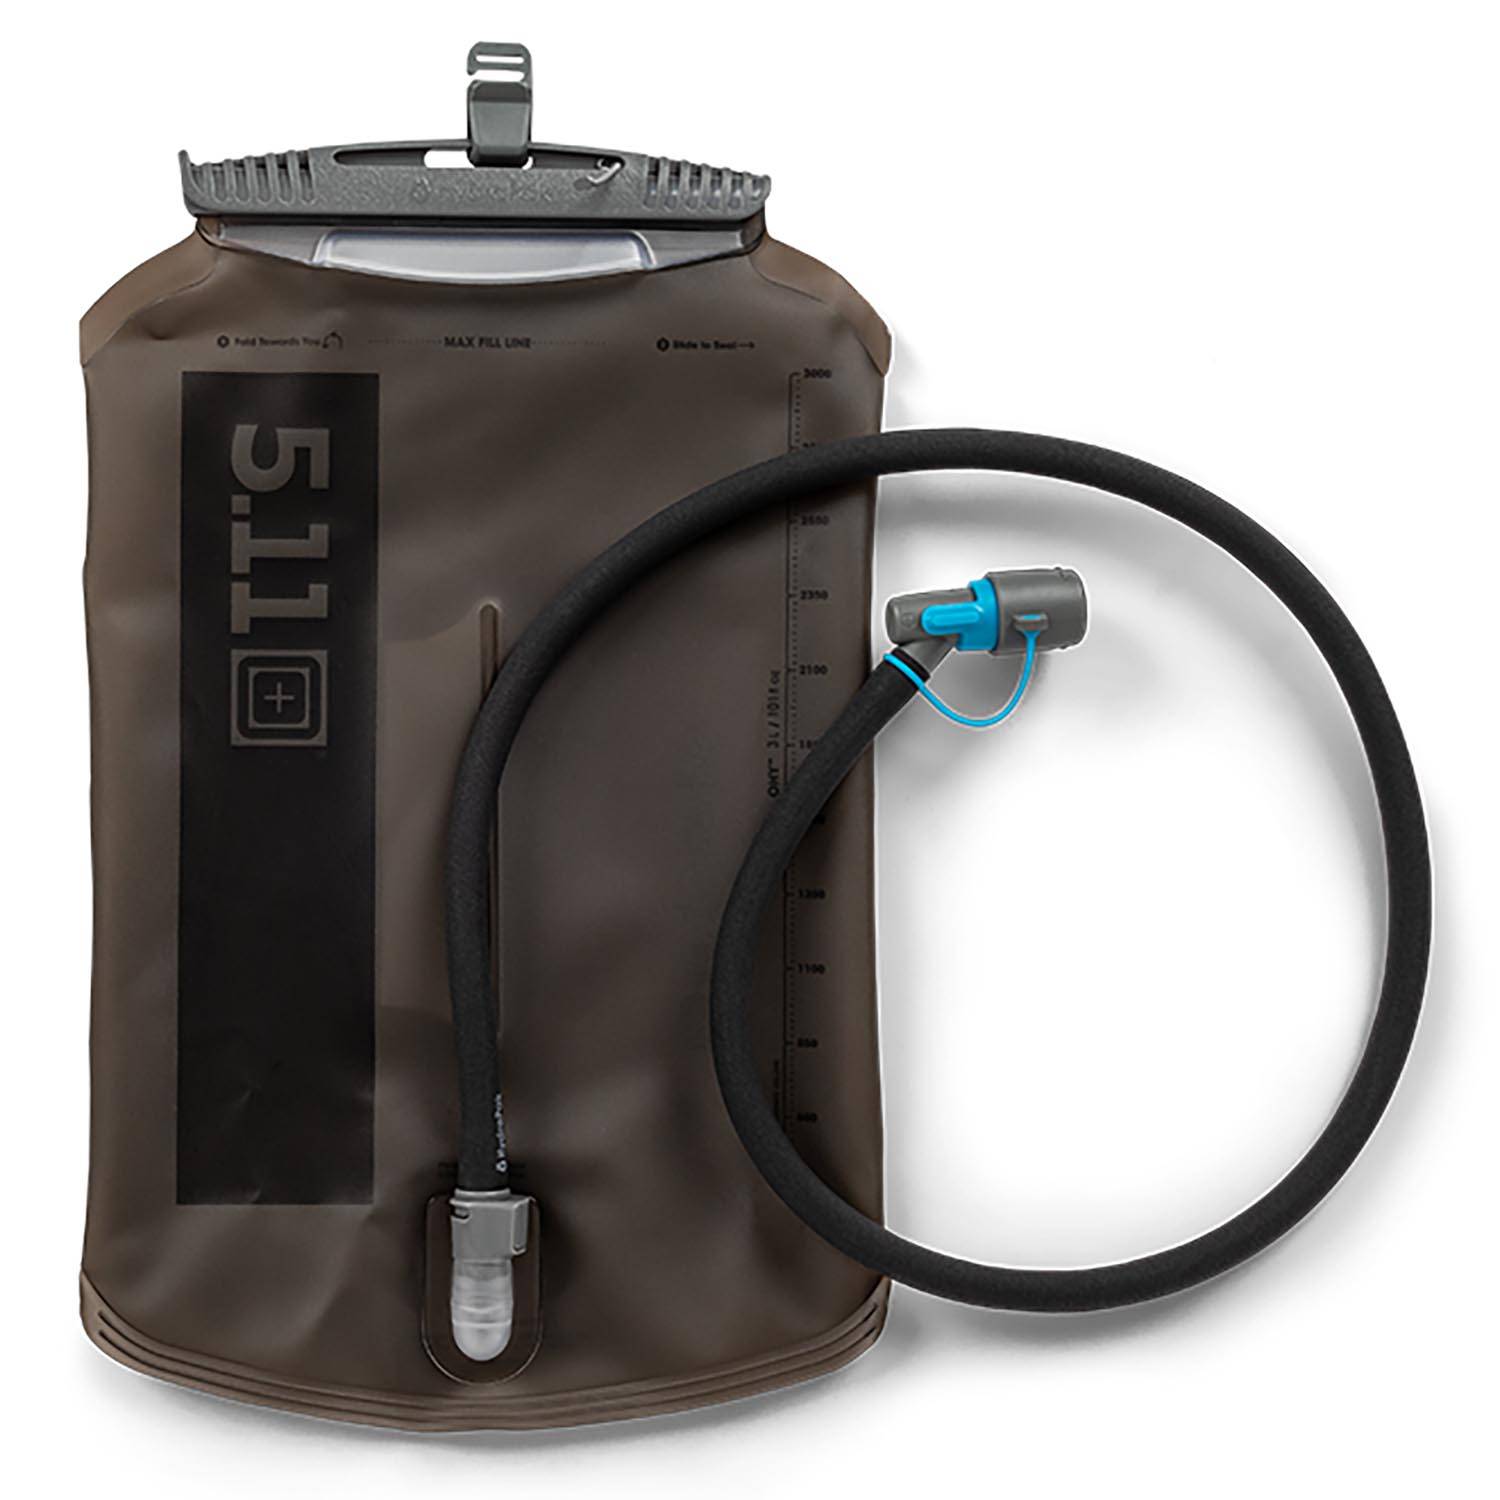 5.11 Tactical WTS Wide 3L Hydration System